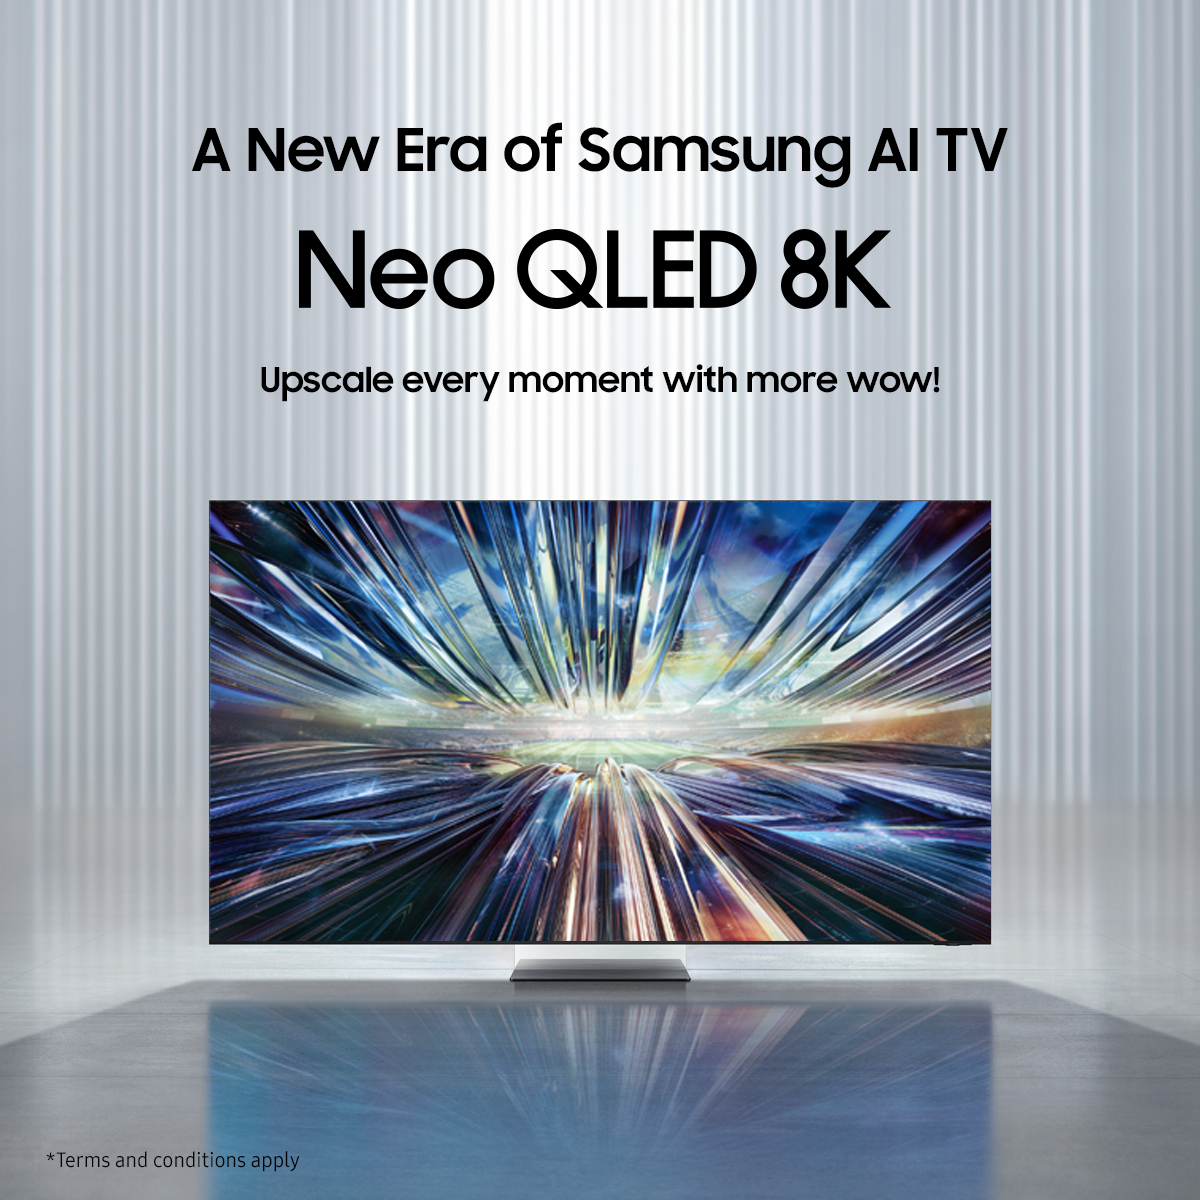 Register your interest now! Discover the new NEO QLED 8K and enter a transformative era where your viewing experience evolves with every moment. Register now: spr.ly/6017bWLub spr.ly/6010bWLue spr.ly/6011bWLu5 #2024NeoQLED8K #AIUpscalesLife #Samsung